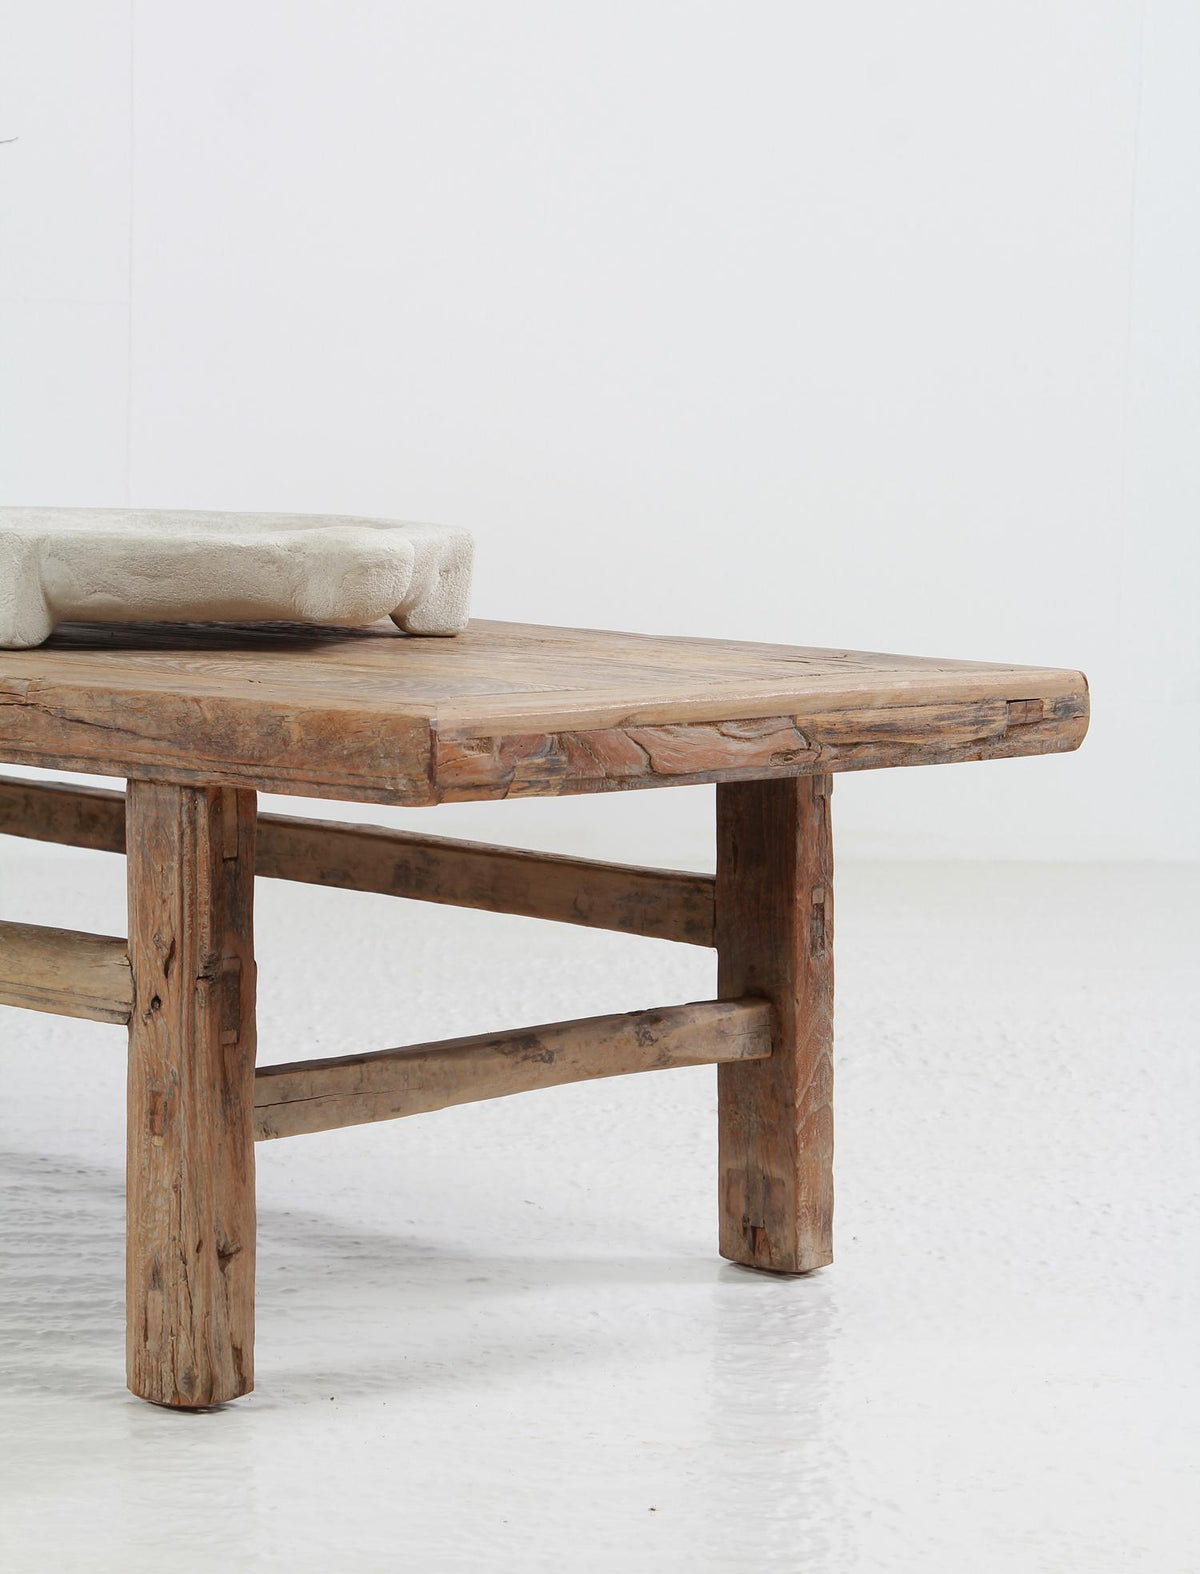 FABULOUS  XL ANTIQUE WEATHERED RUSTIC WOODEN COFFEE TABLE